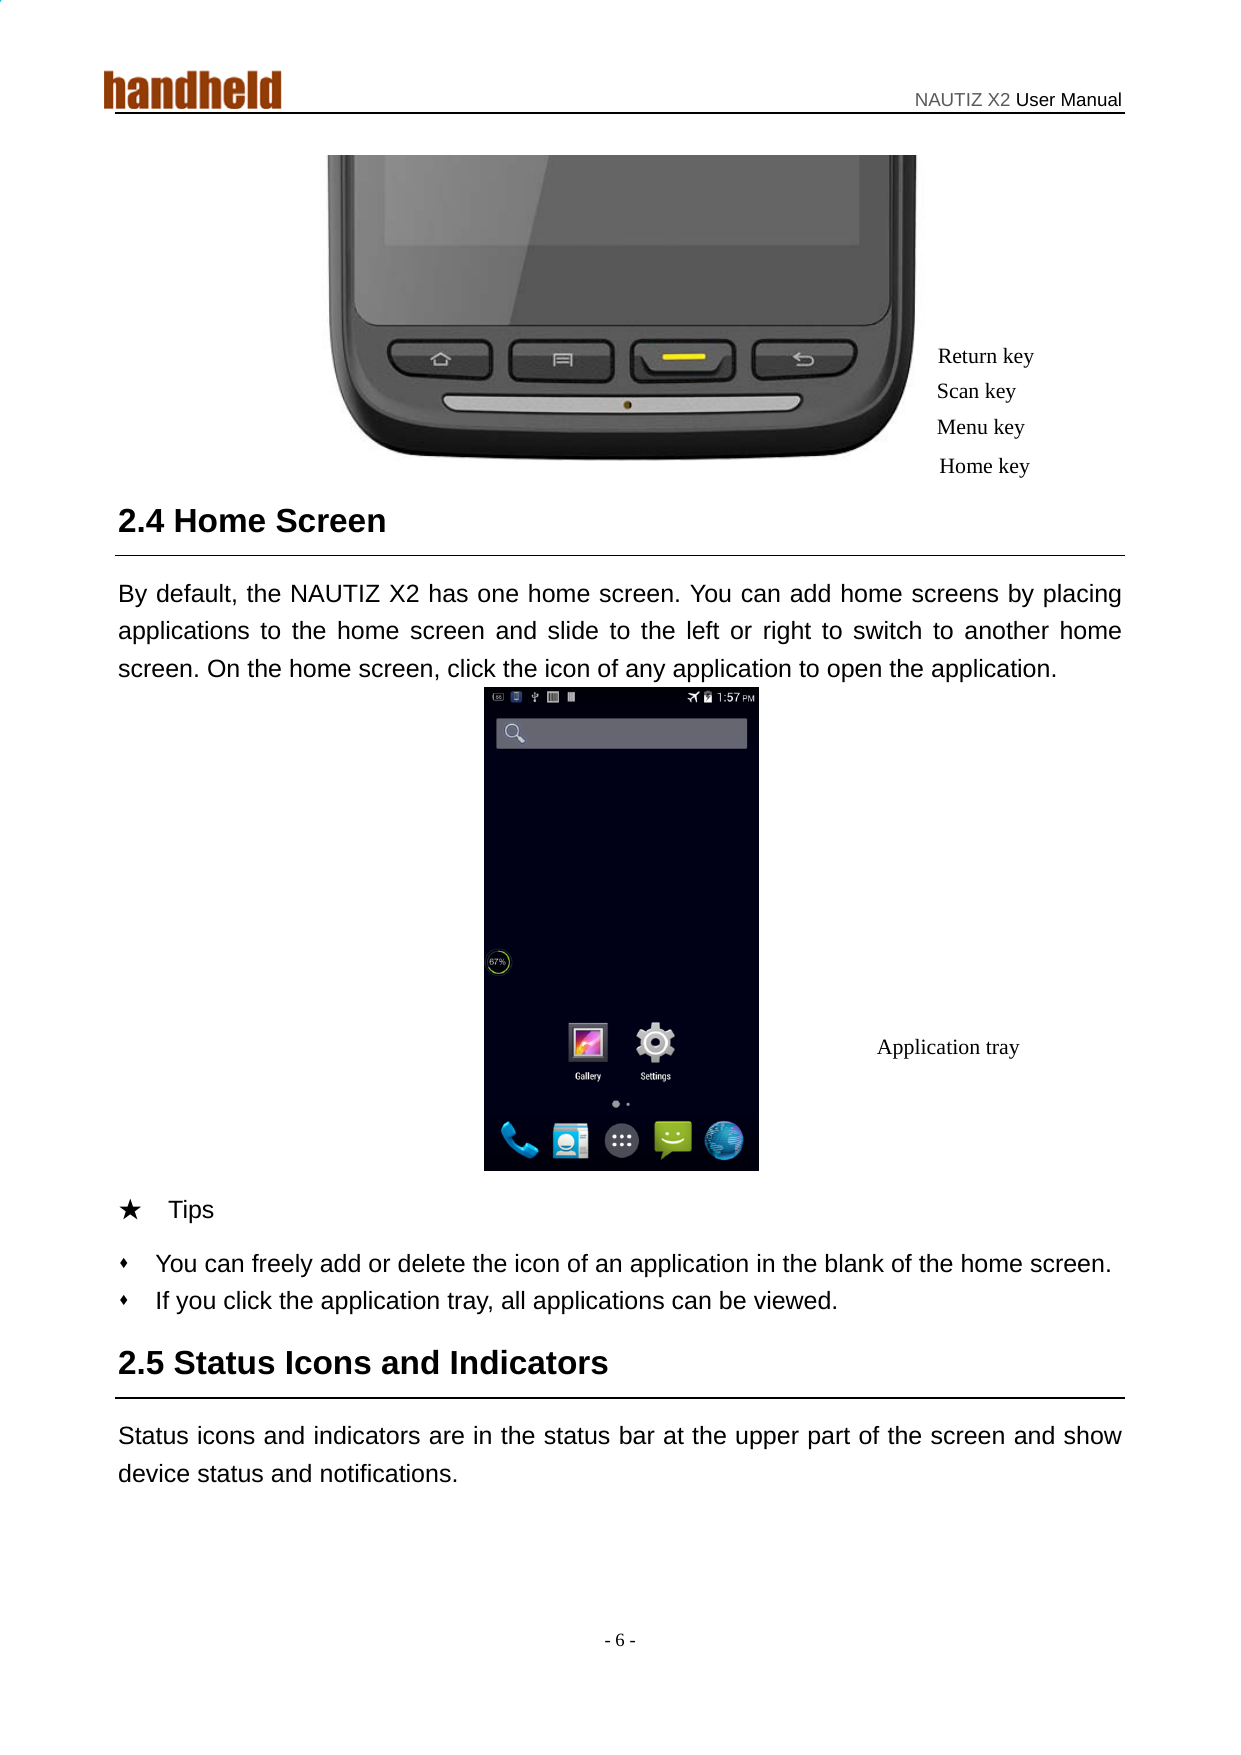 NAUTIZ X2 User Manual - 6 -  2.4 Home Screen By default, the NAUTIZ X2 has one home screen. You can add home screens by placing applications to the home screen and slide to the left or right to switch to another home screen. On the home screen, click the icon of any application to open the application.    ★  Tips    You can freely add or delete the icon of an application in the blank of the home screen.   If you click the application tray, all applications can be viewed.   2.5 Status Icons and Indicators Status icons and indicators are in the status bar at the upper part of the screen and show device status and notifications.     Return key Scan key Application tray Home key Menu key 